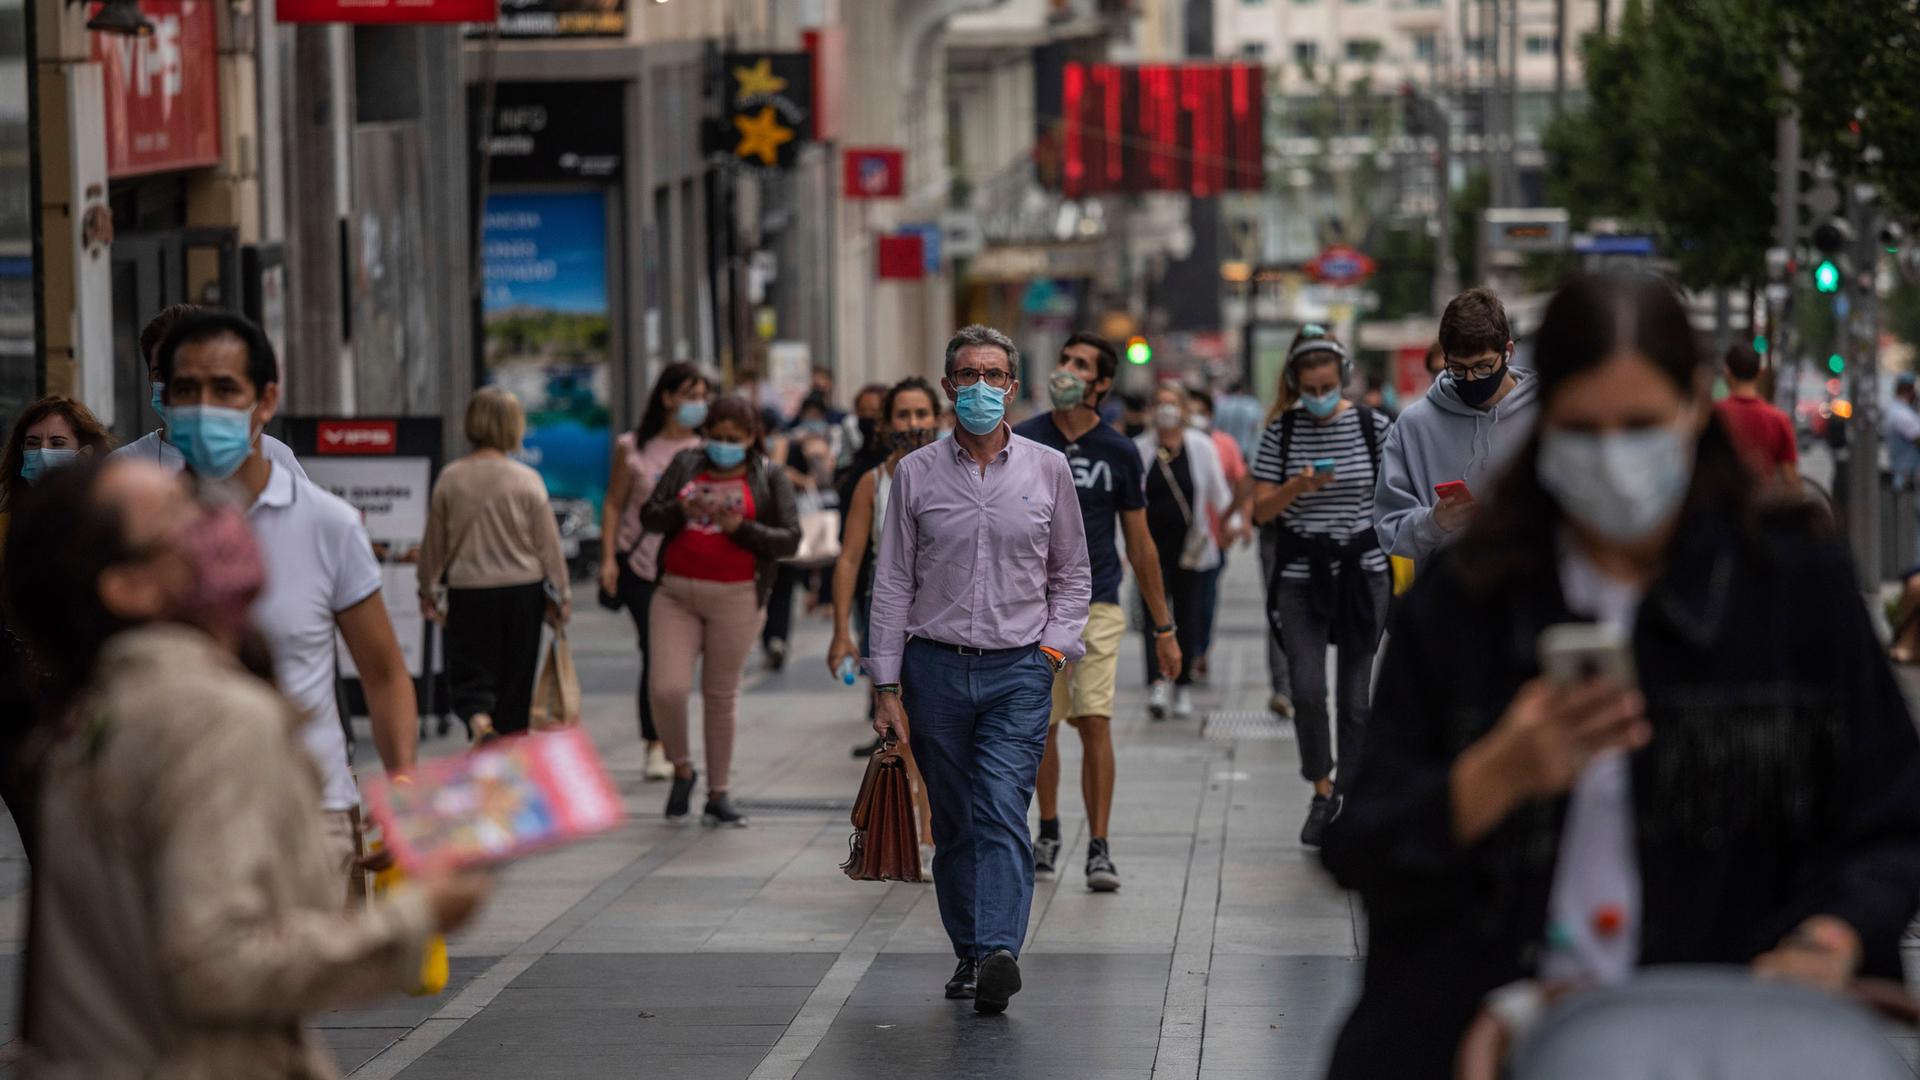 Dozens of people are show walking around a shopping district and wearing face masks in Madrid, Spain.